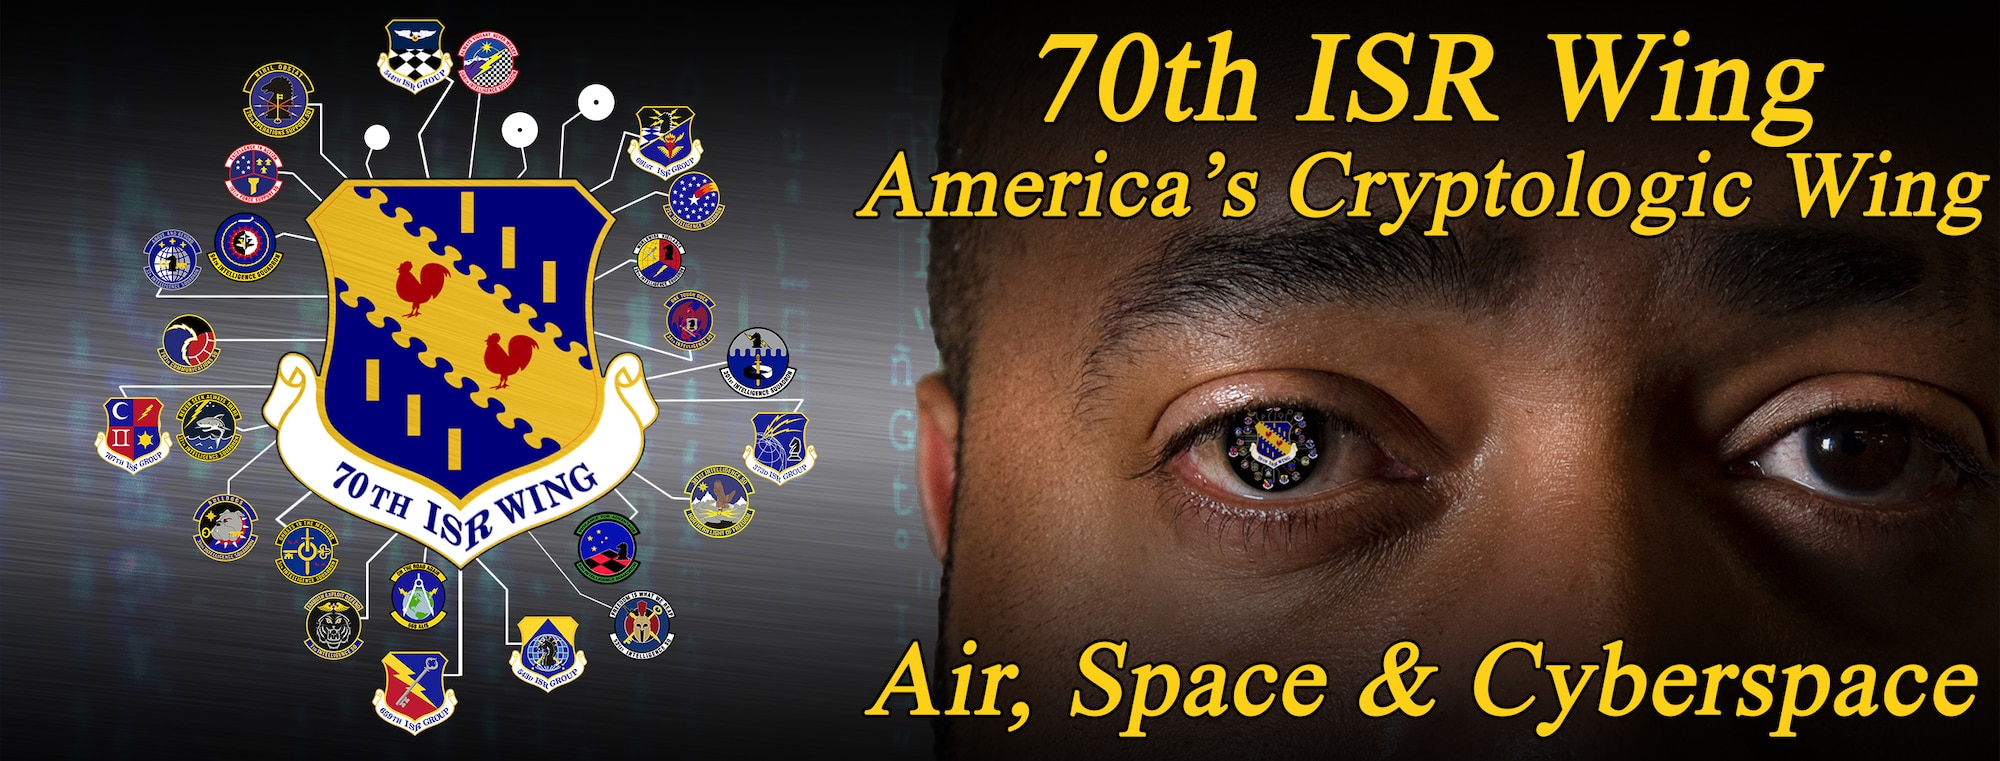 70th ISR Wing 
America's Cryptologic Wing
Air, Space & Cyberspace